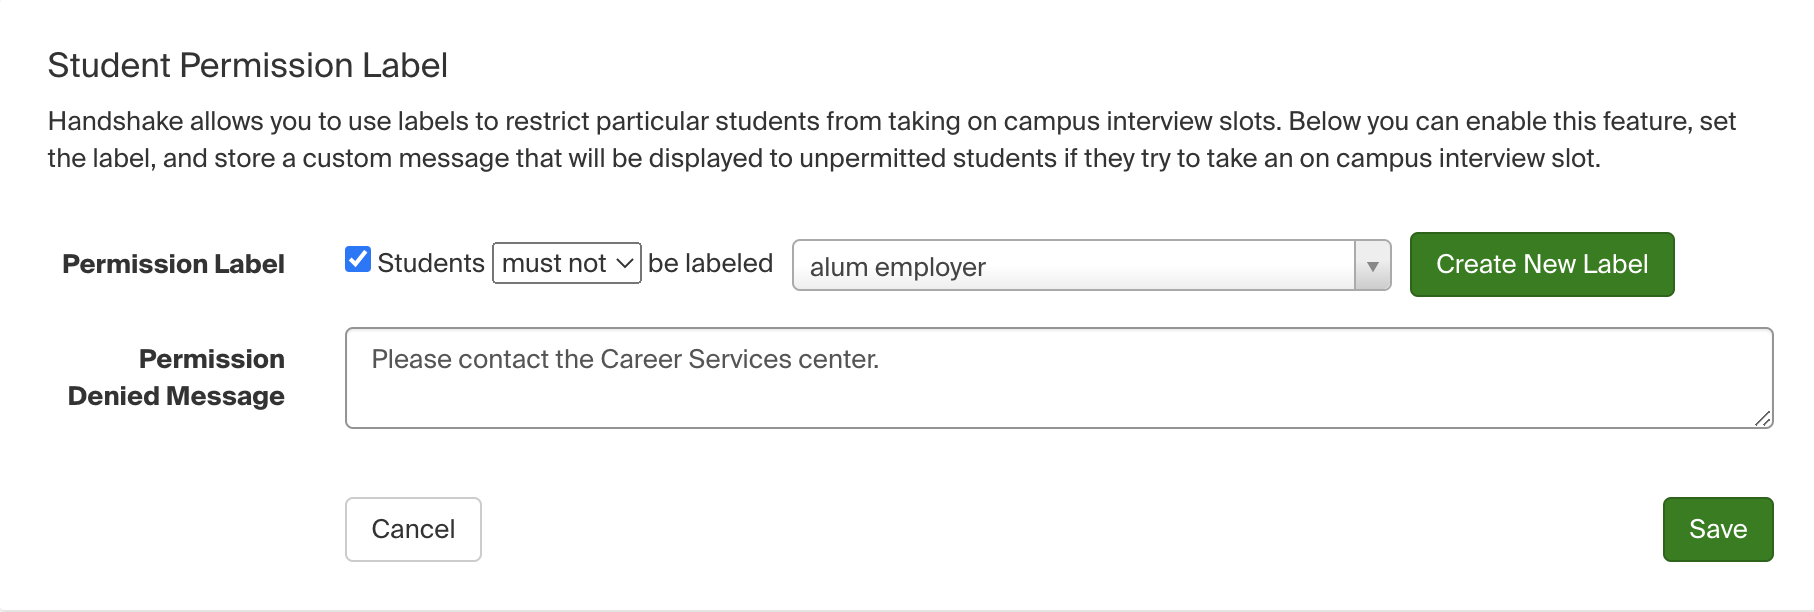 Student_Permissions_Label_Image.png